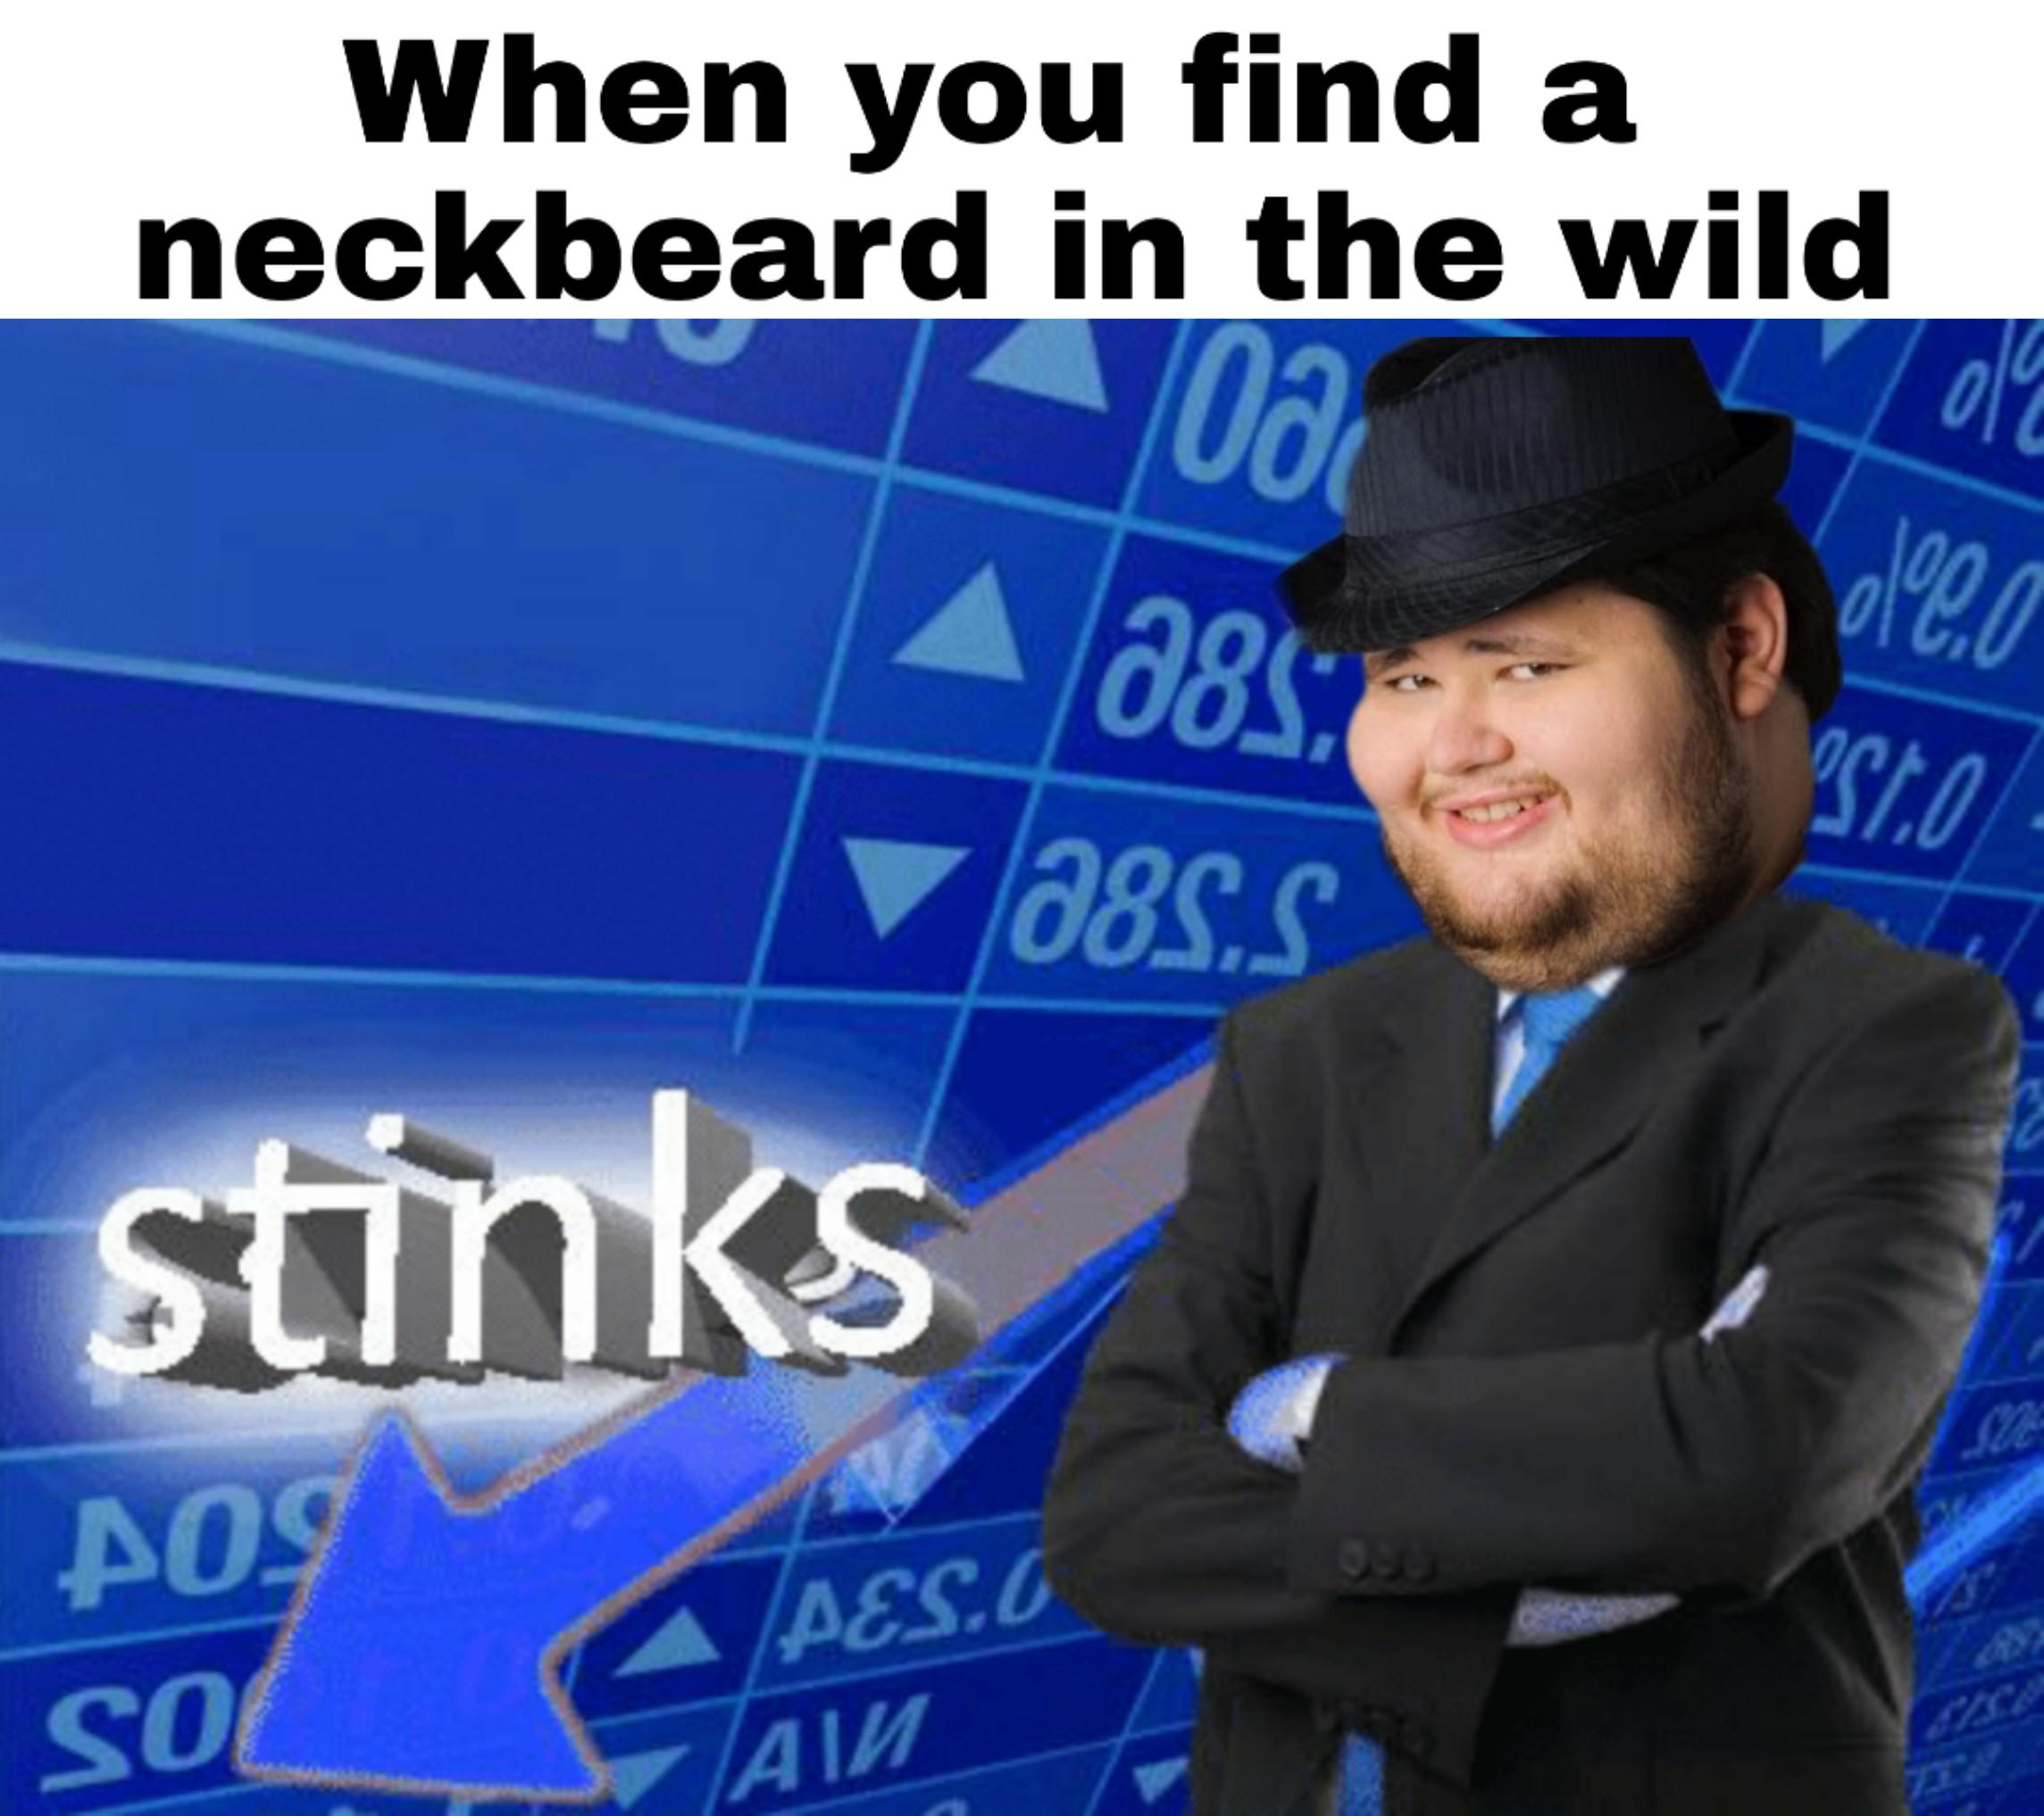 not stonks meme - When you find a neckbeard in the wild Nuo A2851 012 310 28SS stinks Soc Peso